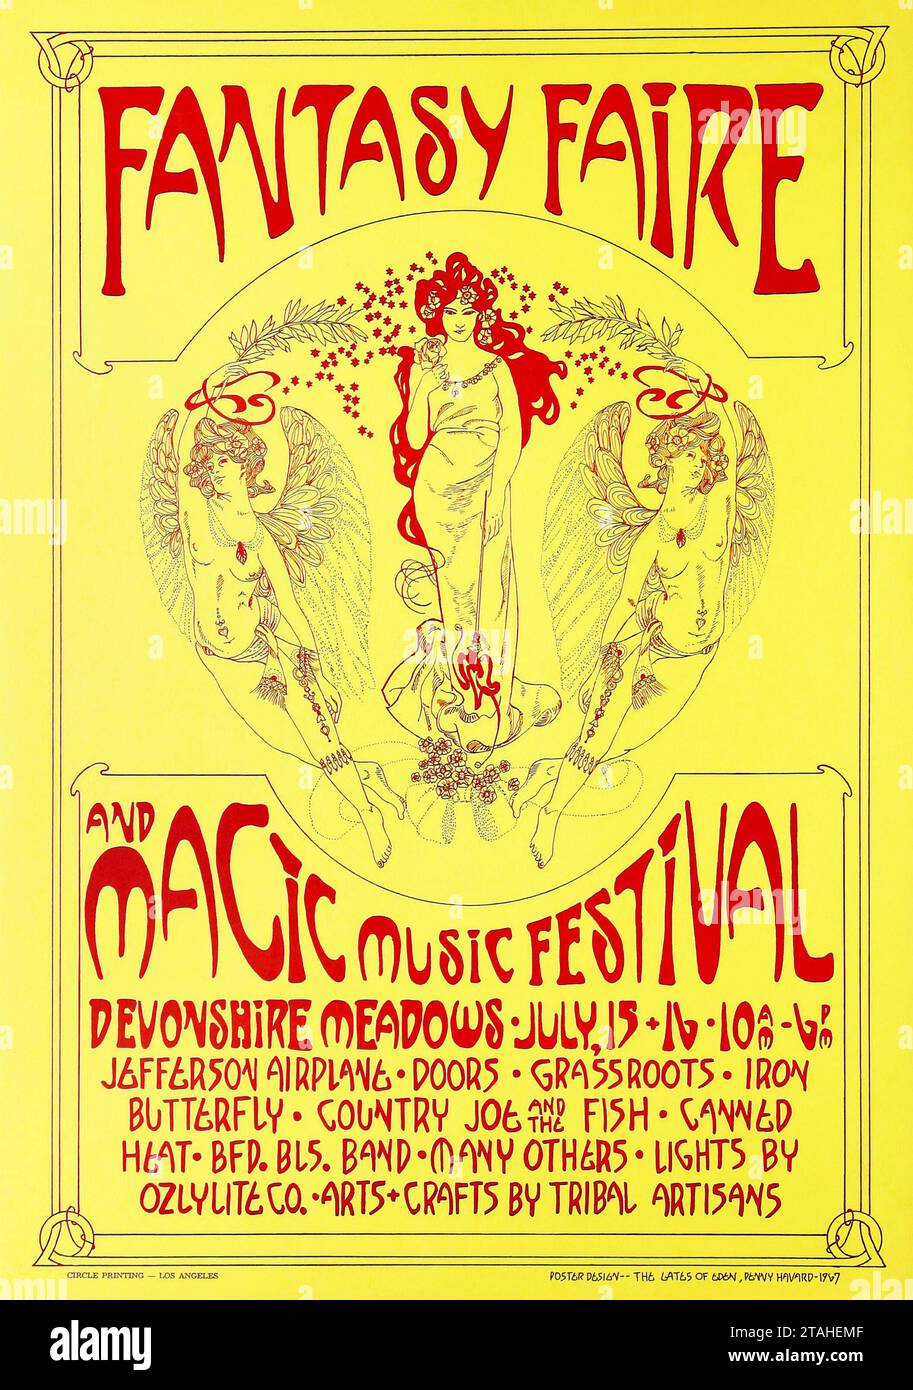 Fantasy Faire and Magic Music Festival Poster (1967). Devonshire Meadows in Northridge, California - Jefferson Airplane, Doors, Grassroots, Country Joe and The Fish, Canned Heat and many more. Stock Photo